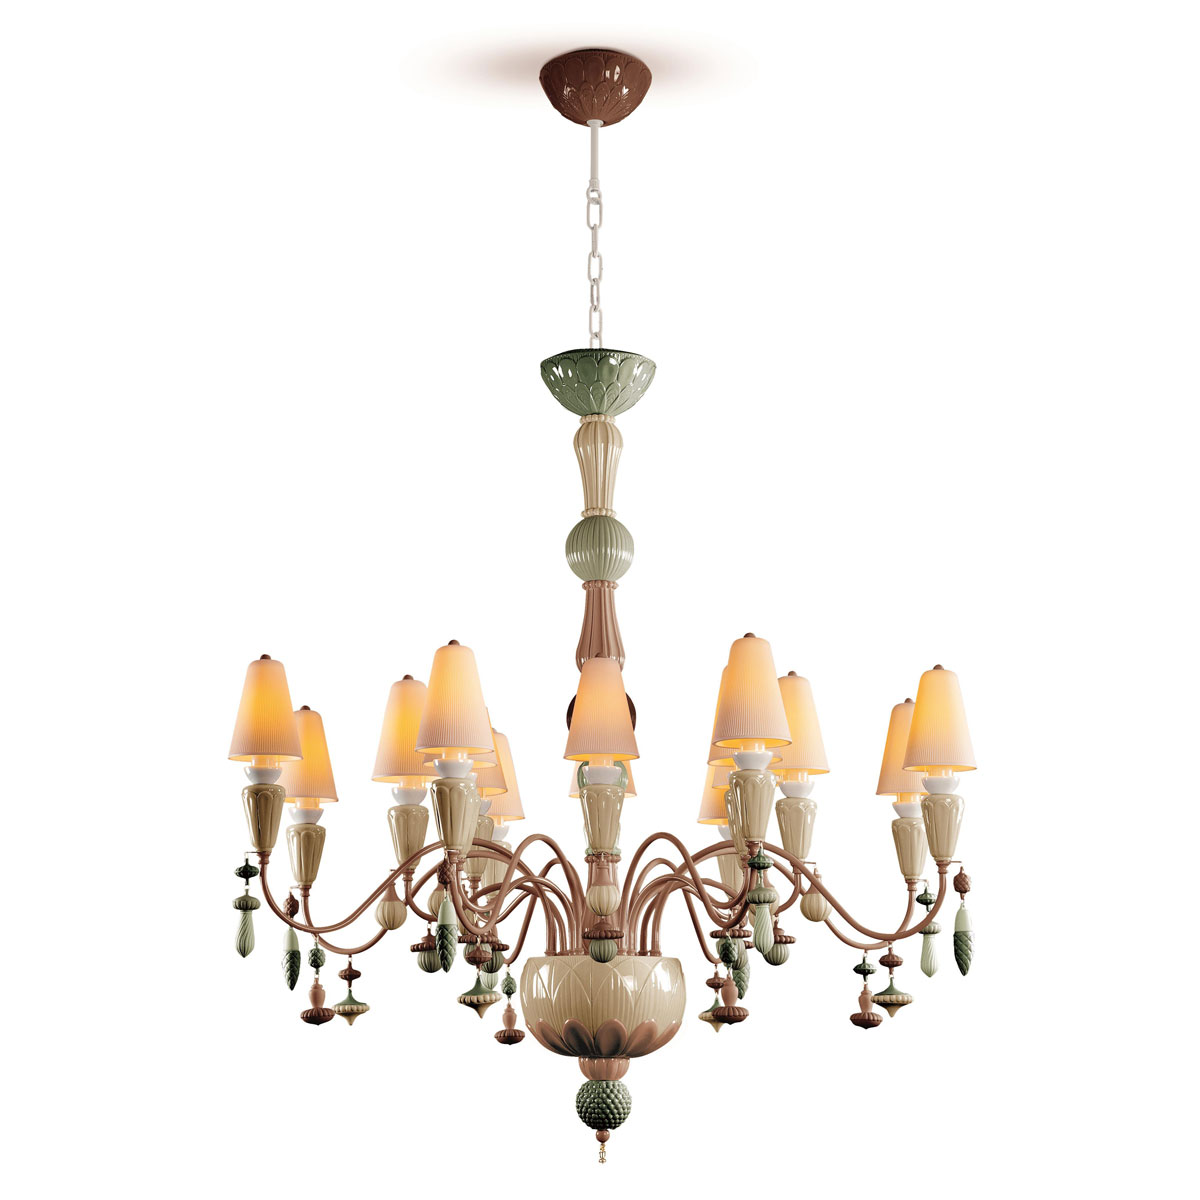 Lladro Classic Lighting, Ivy And Seed 16 Lights Chandelier. Medium Flat Model. Spices